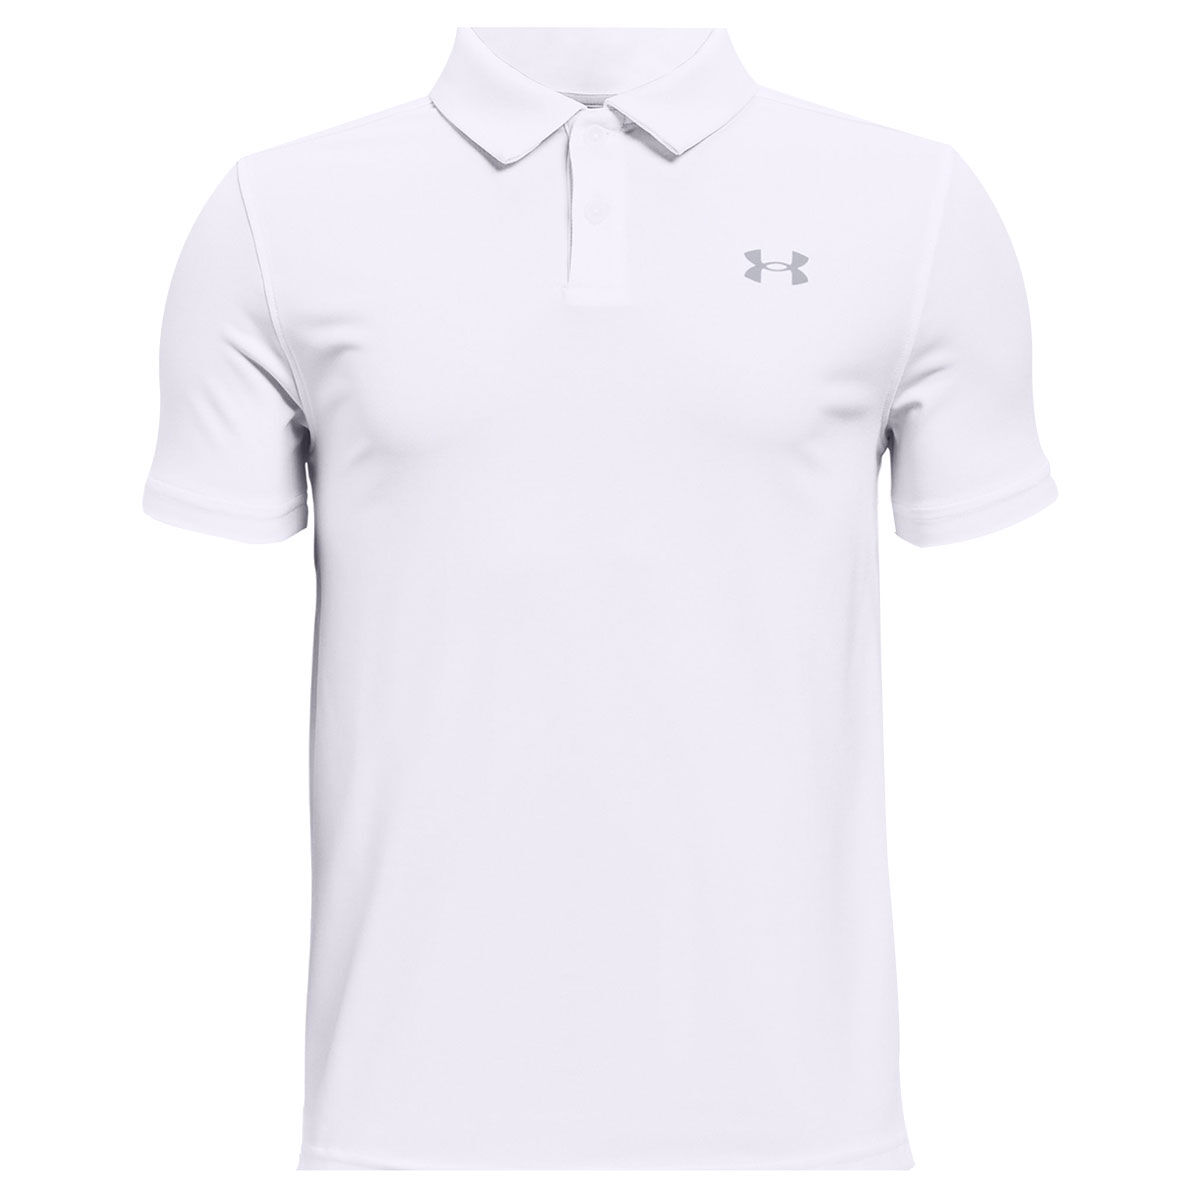 Image of Under Armour Junior Polo-Shirt Performance Unisex White/grey/grey 11-12 years | Online Golf